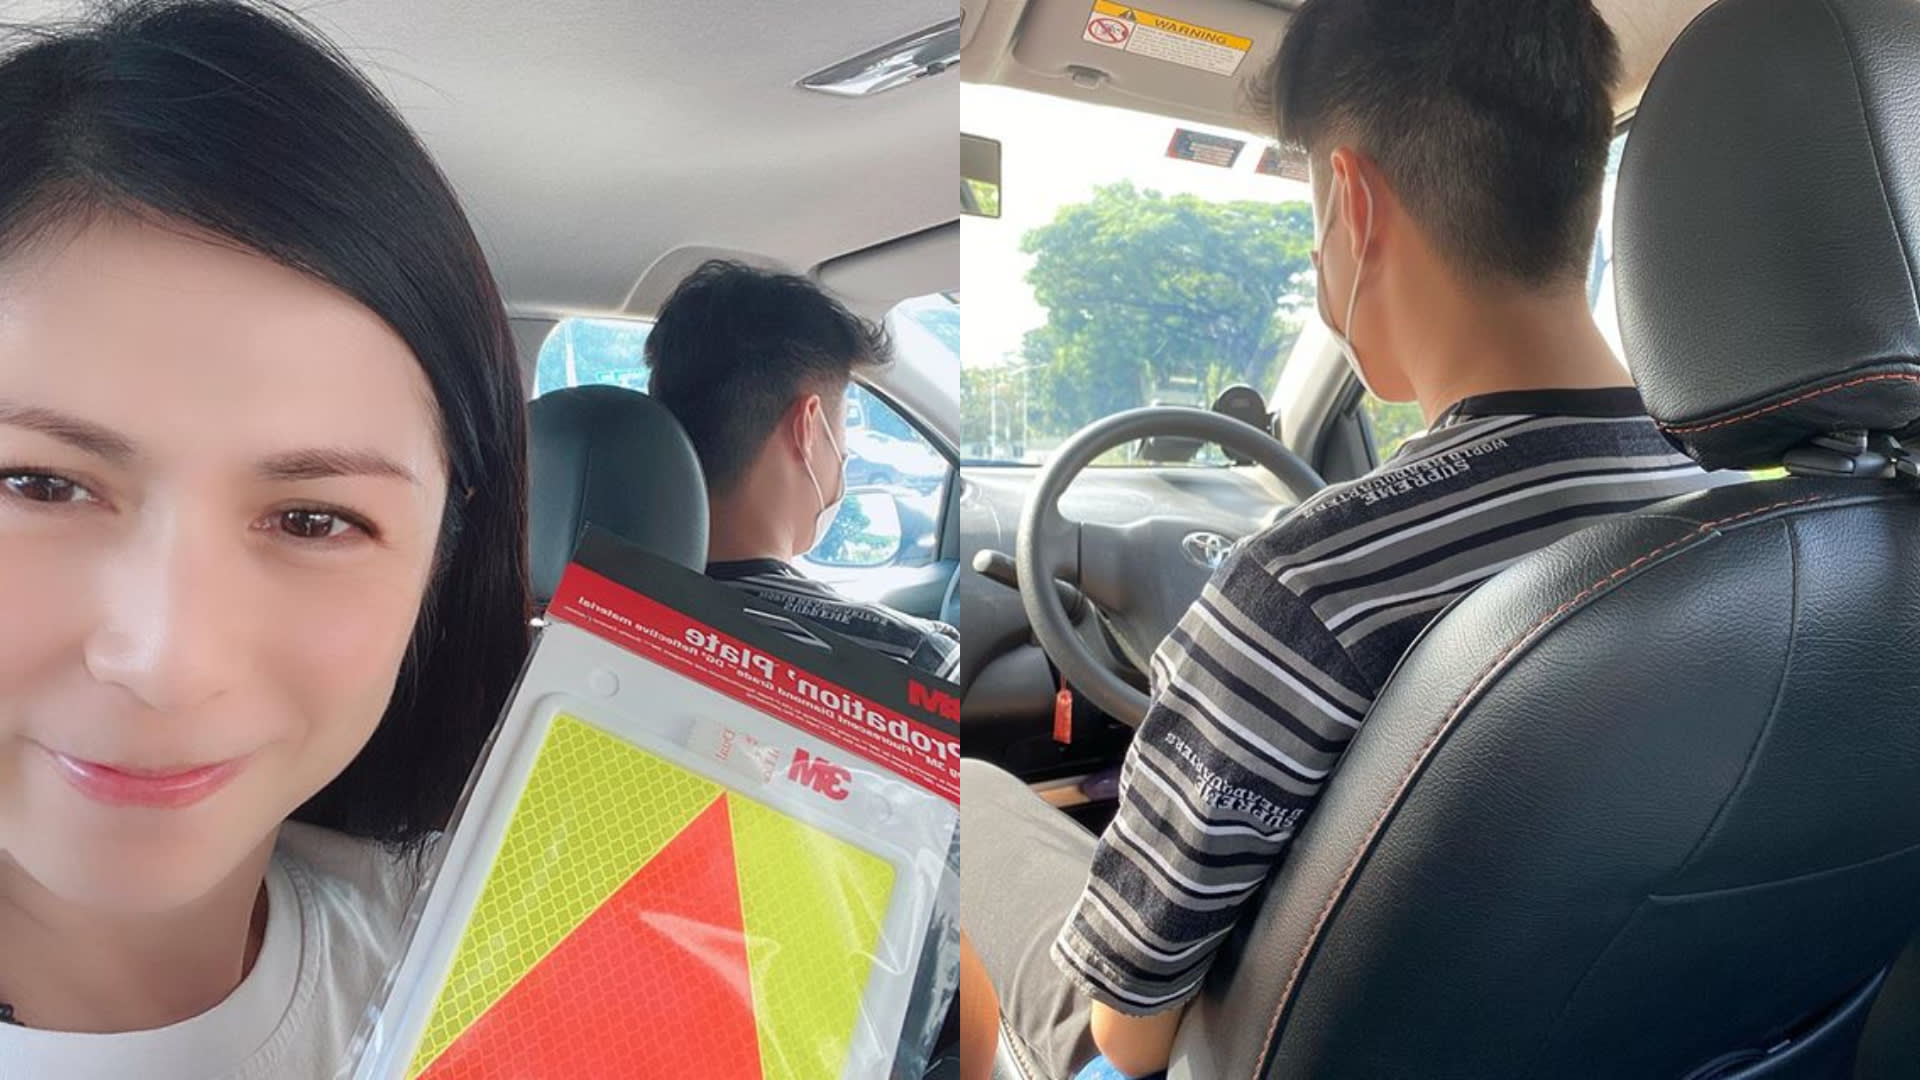 Pan Lingling’s Son Just Got His Driving License And She Already Plans To Use Him As Her Chauffeur